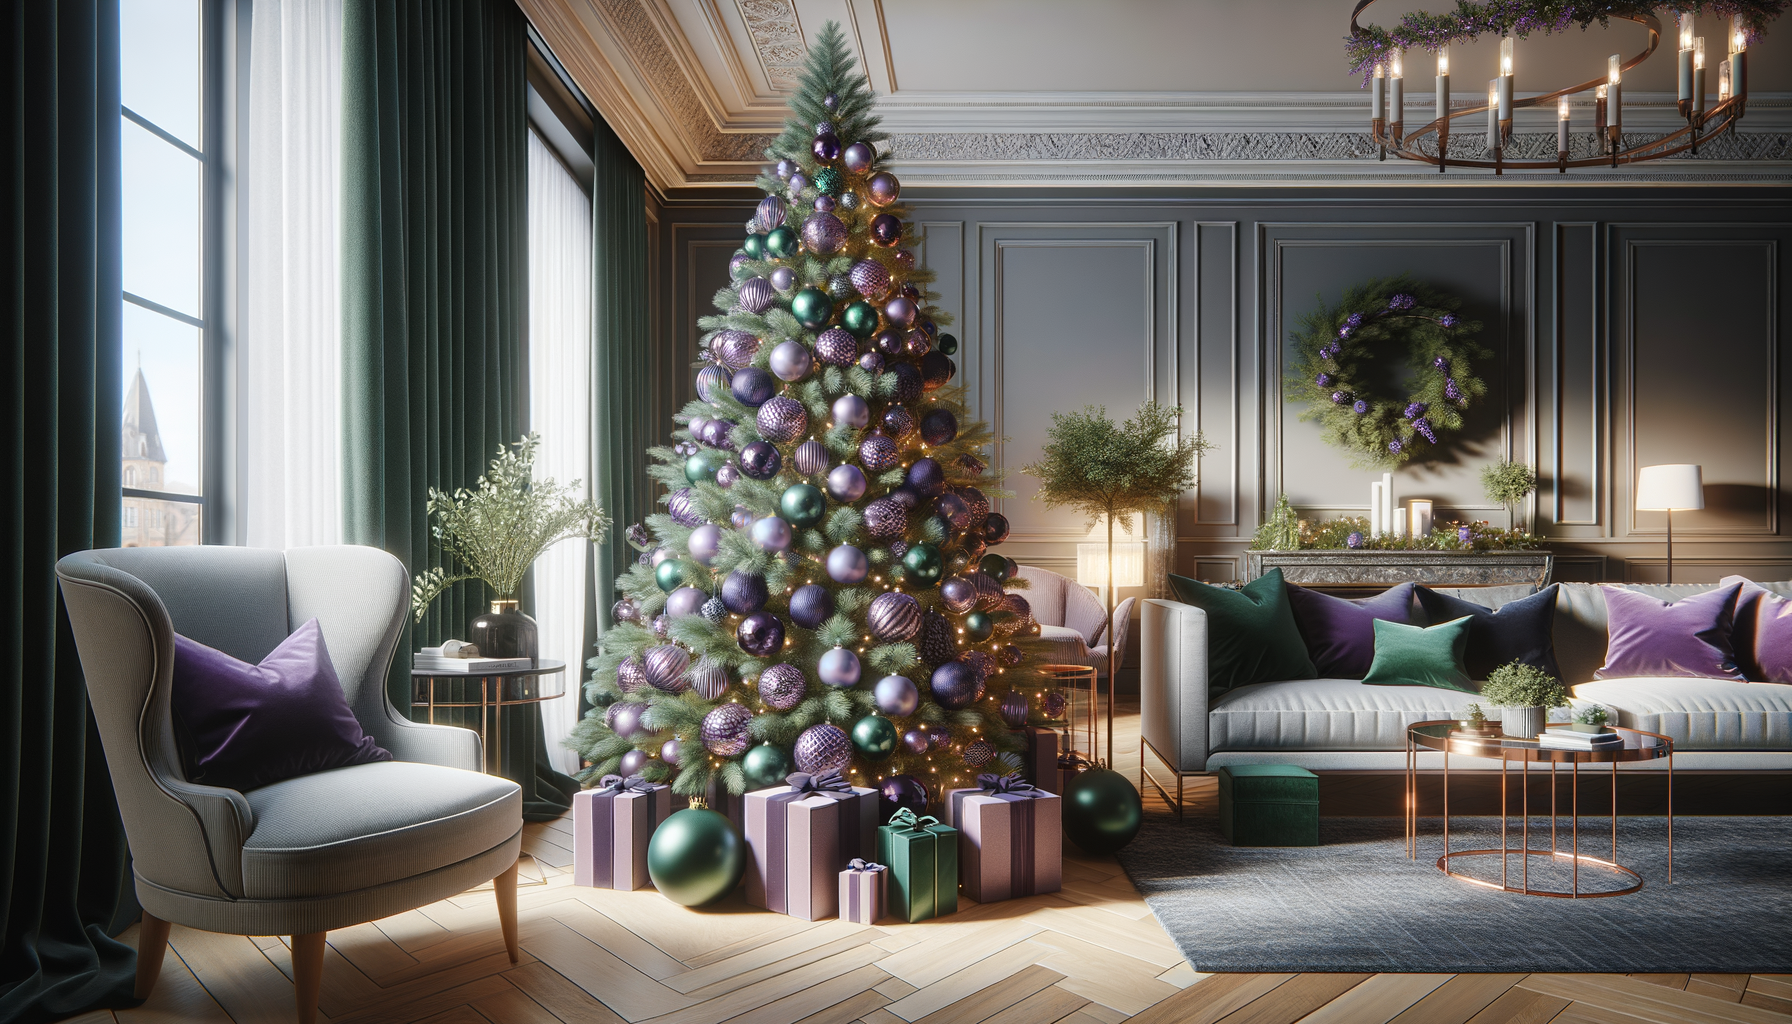 christmas tree in living room decorated with emerald green and purple accents & ornaments